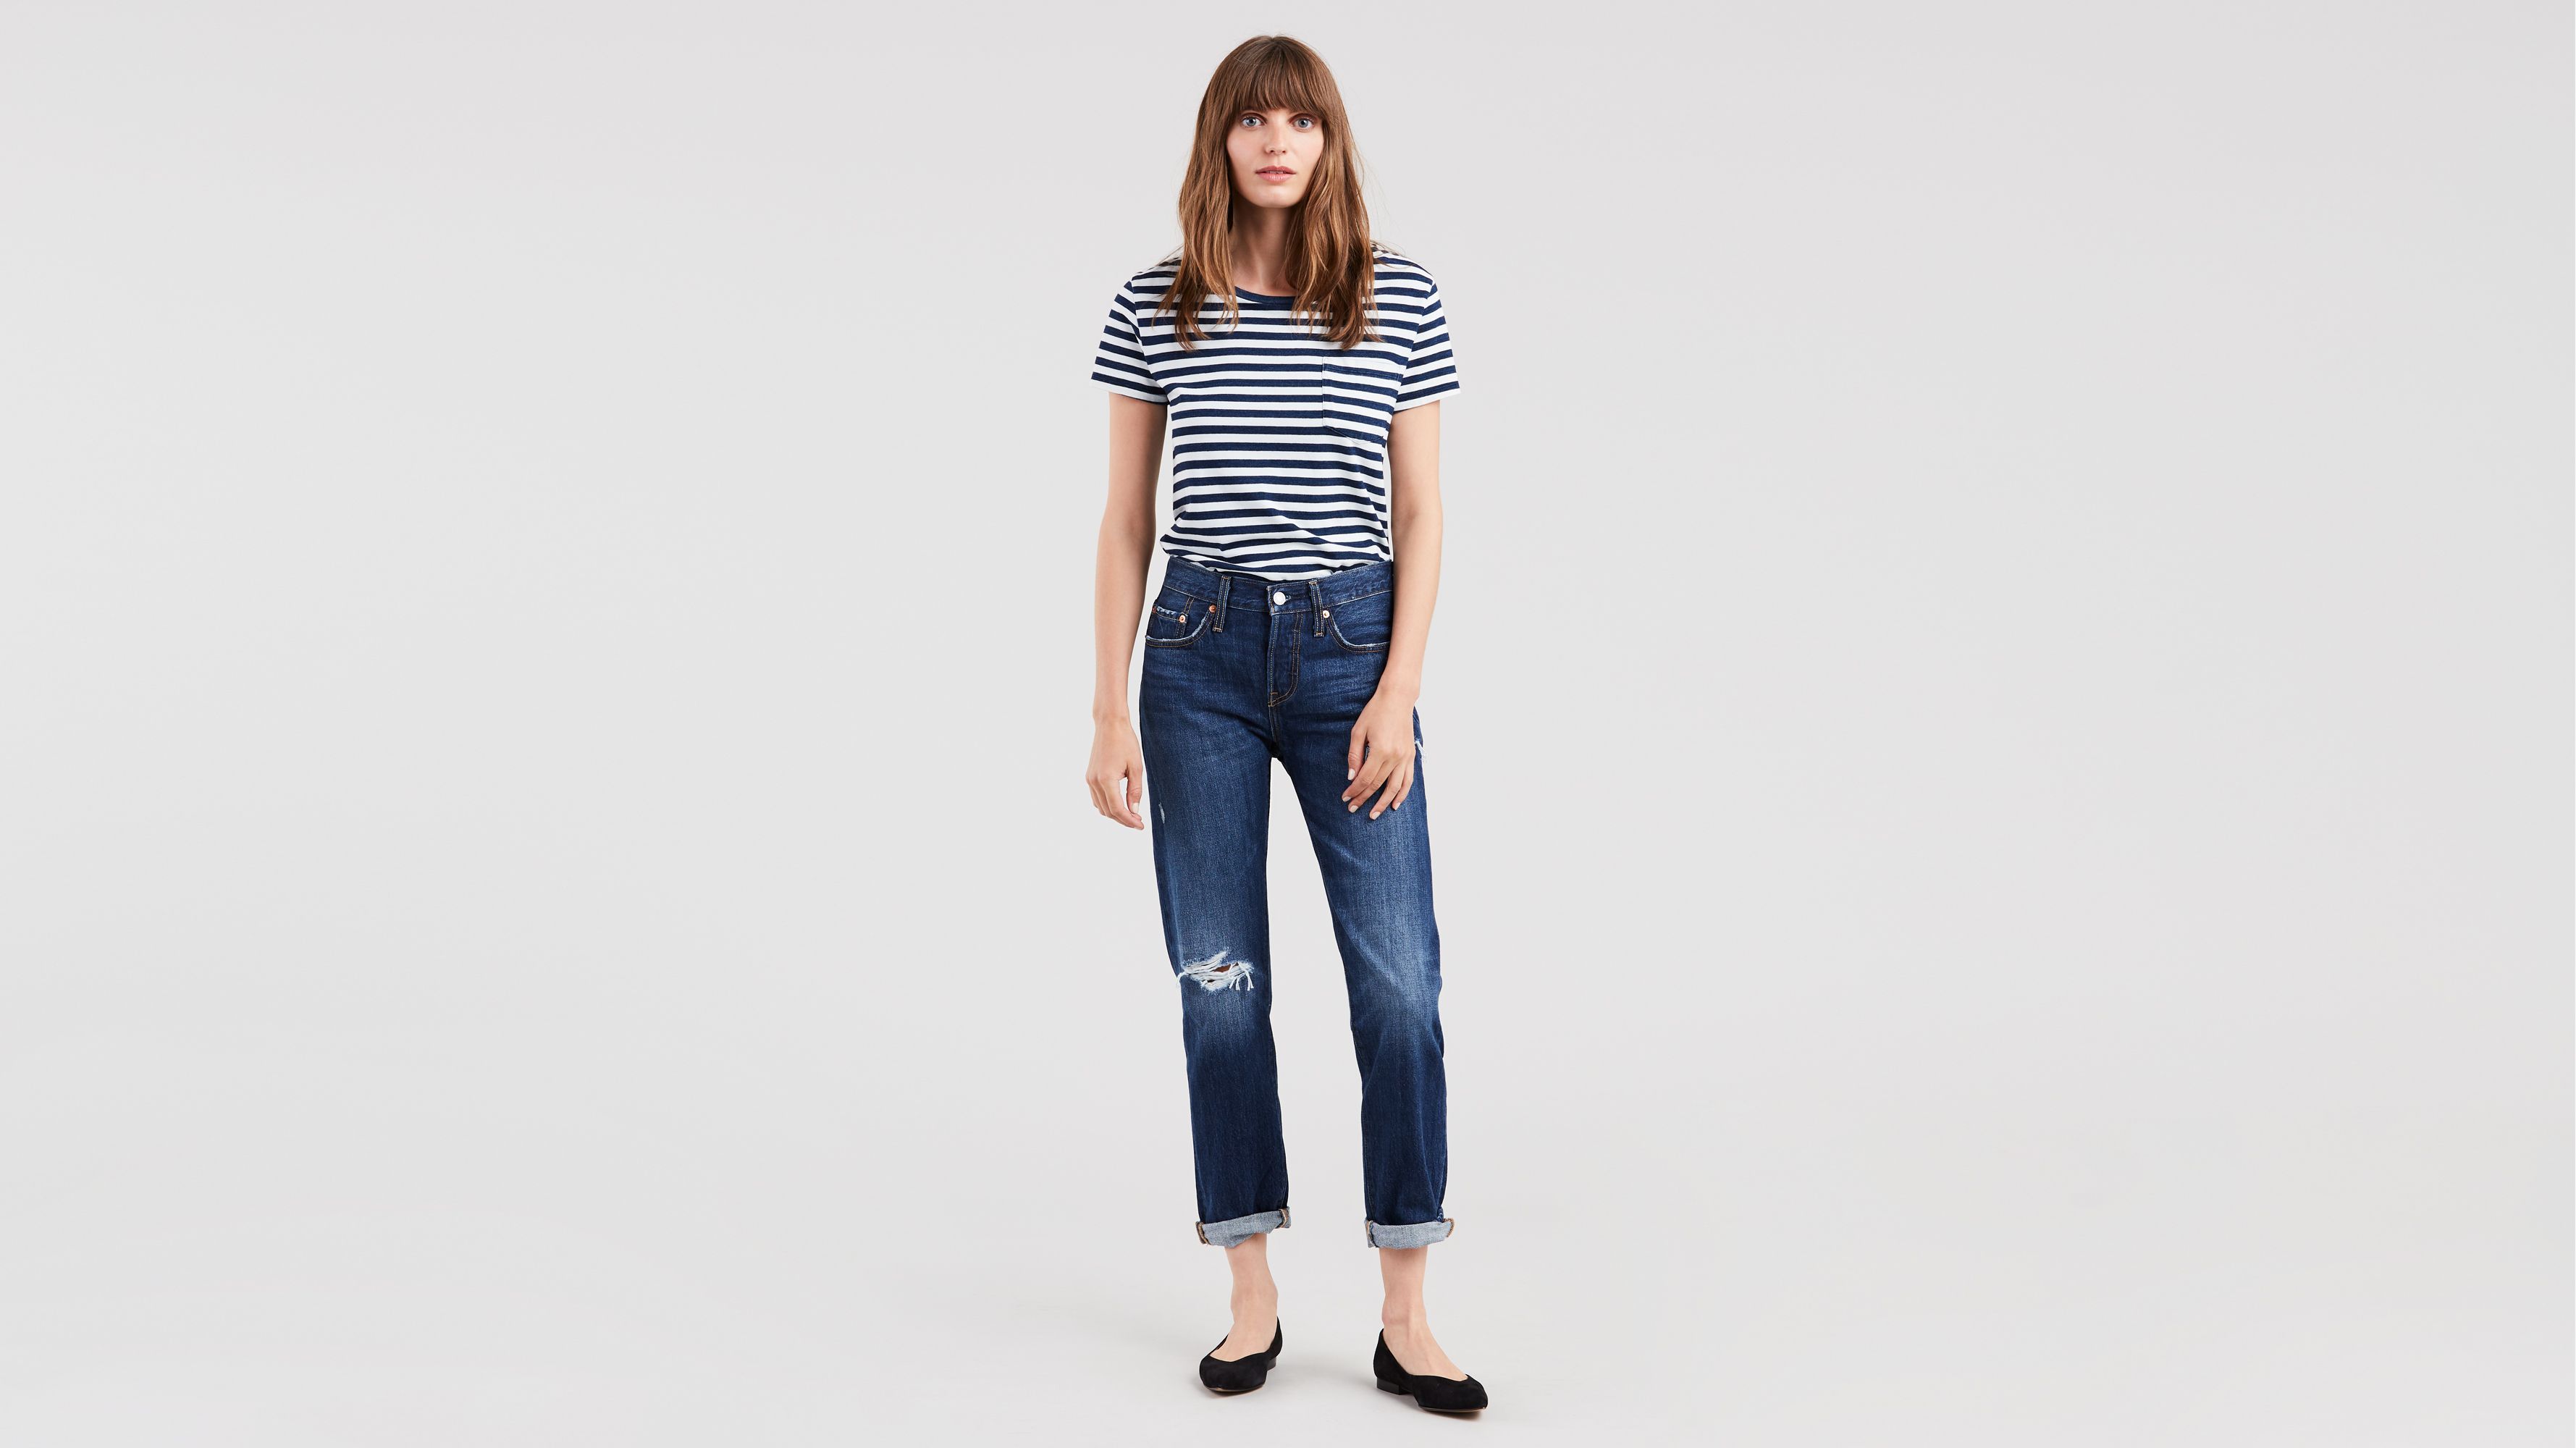 levi's women's 501 tapered jeans